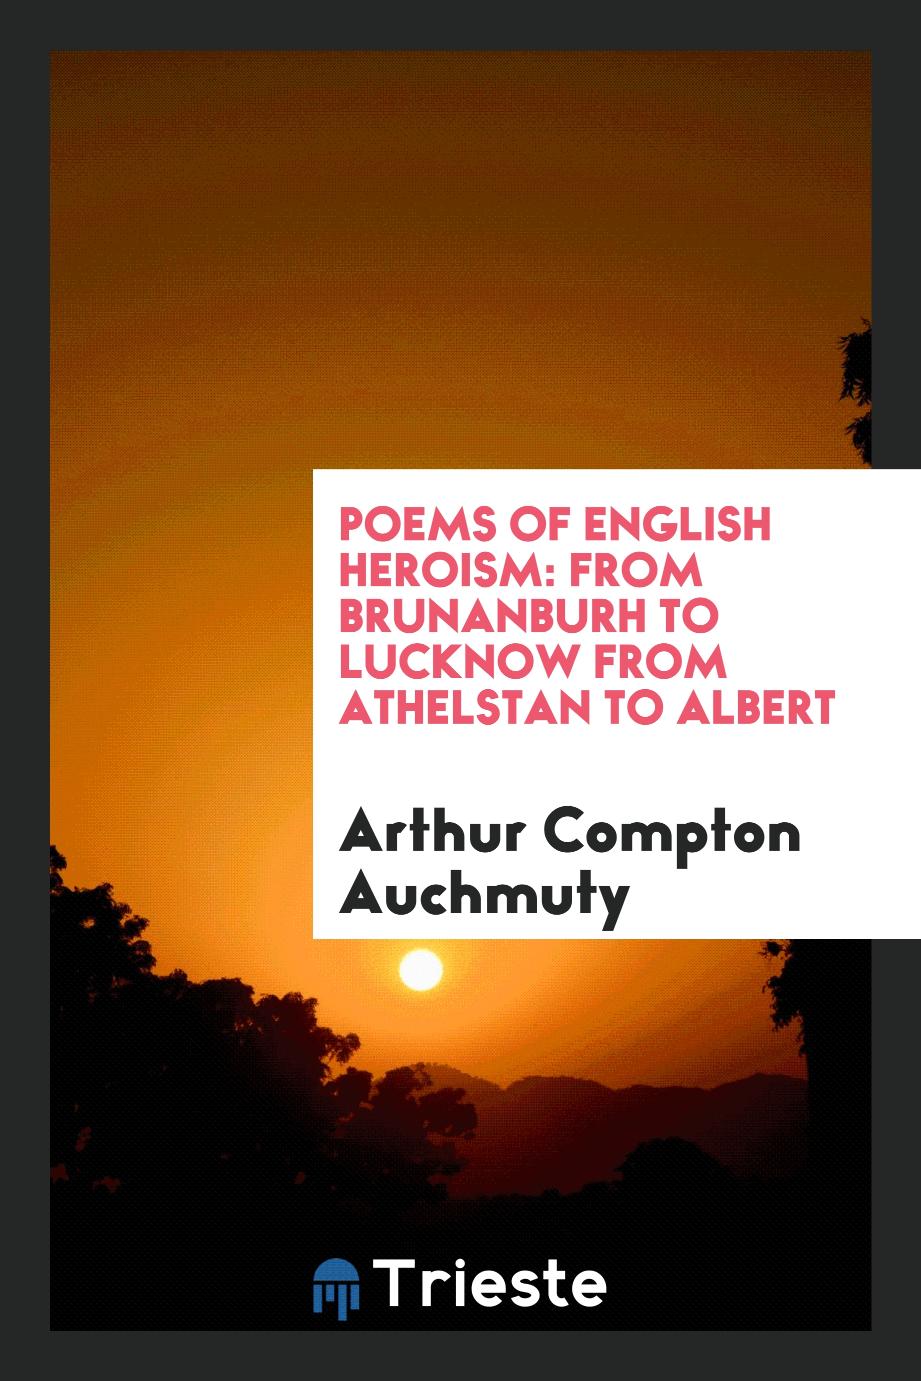 Poems of English Heroism: From Brunanburh to Lucknow from Athelstan to Albert